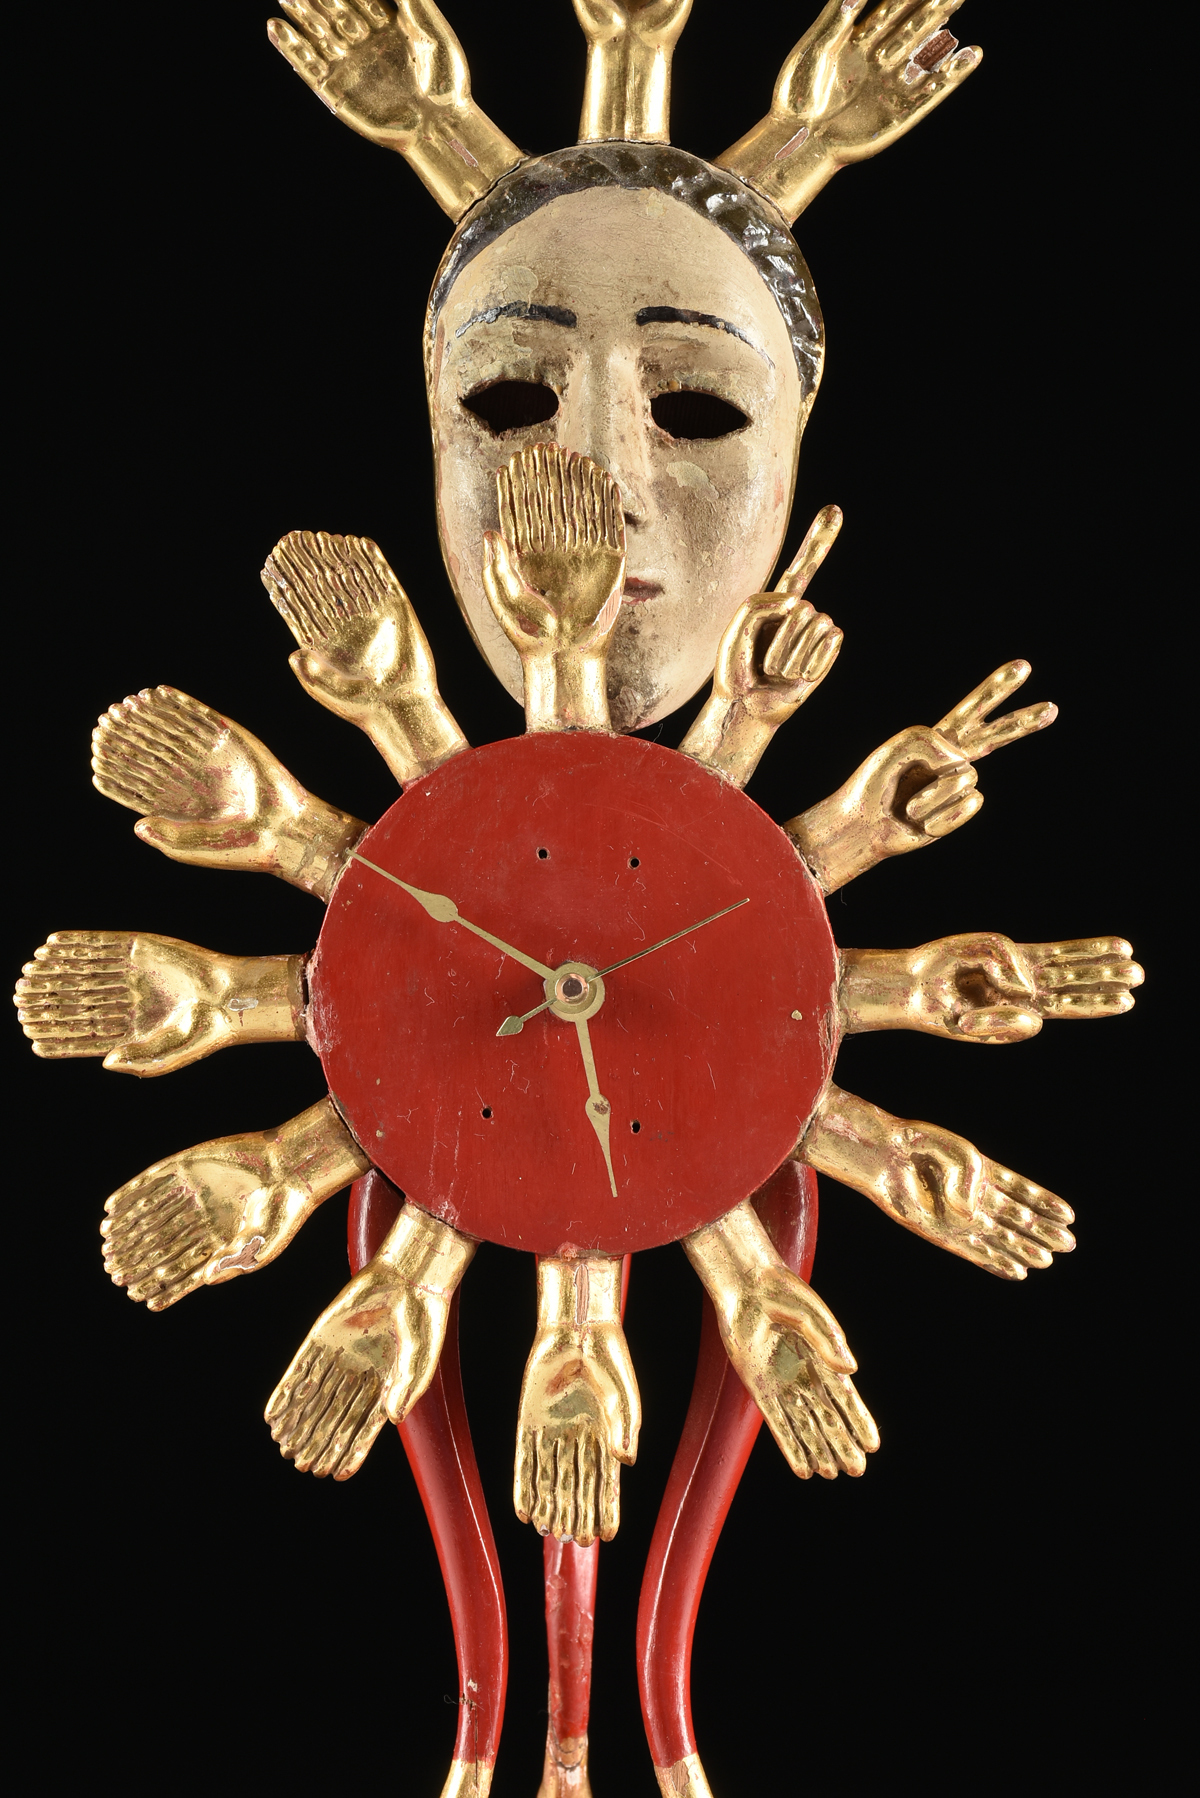 PEDRO FRIEDEBERG (Italian/Mexican b. 1936) AN HOROLOGICAL SCULPTURE ON STAND, "Clock with Mask," - Image 4 of 10